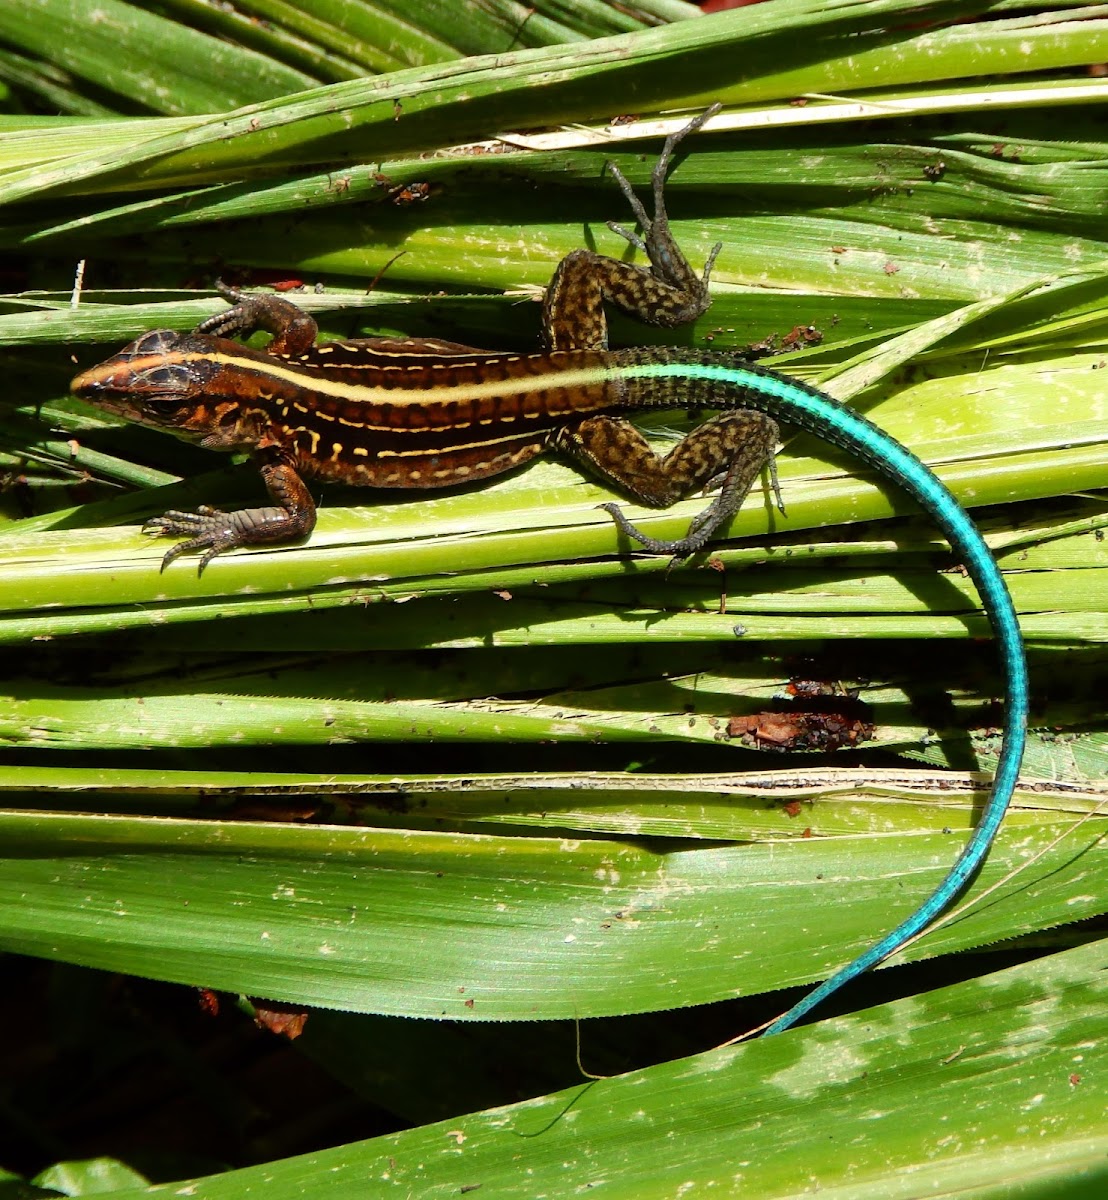 Middle American Ameiva